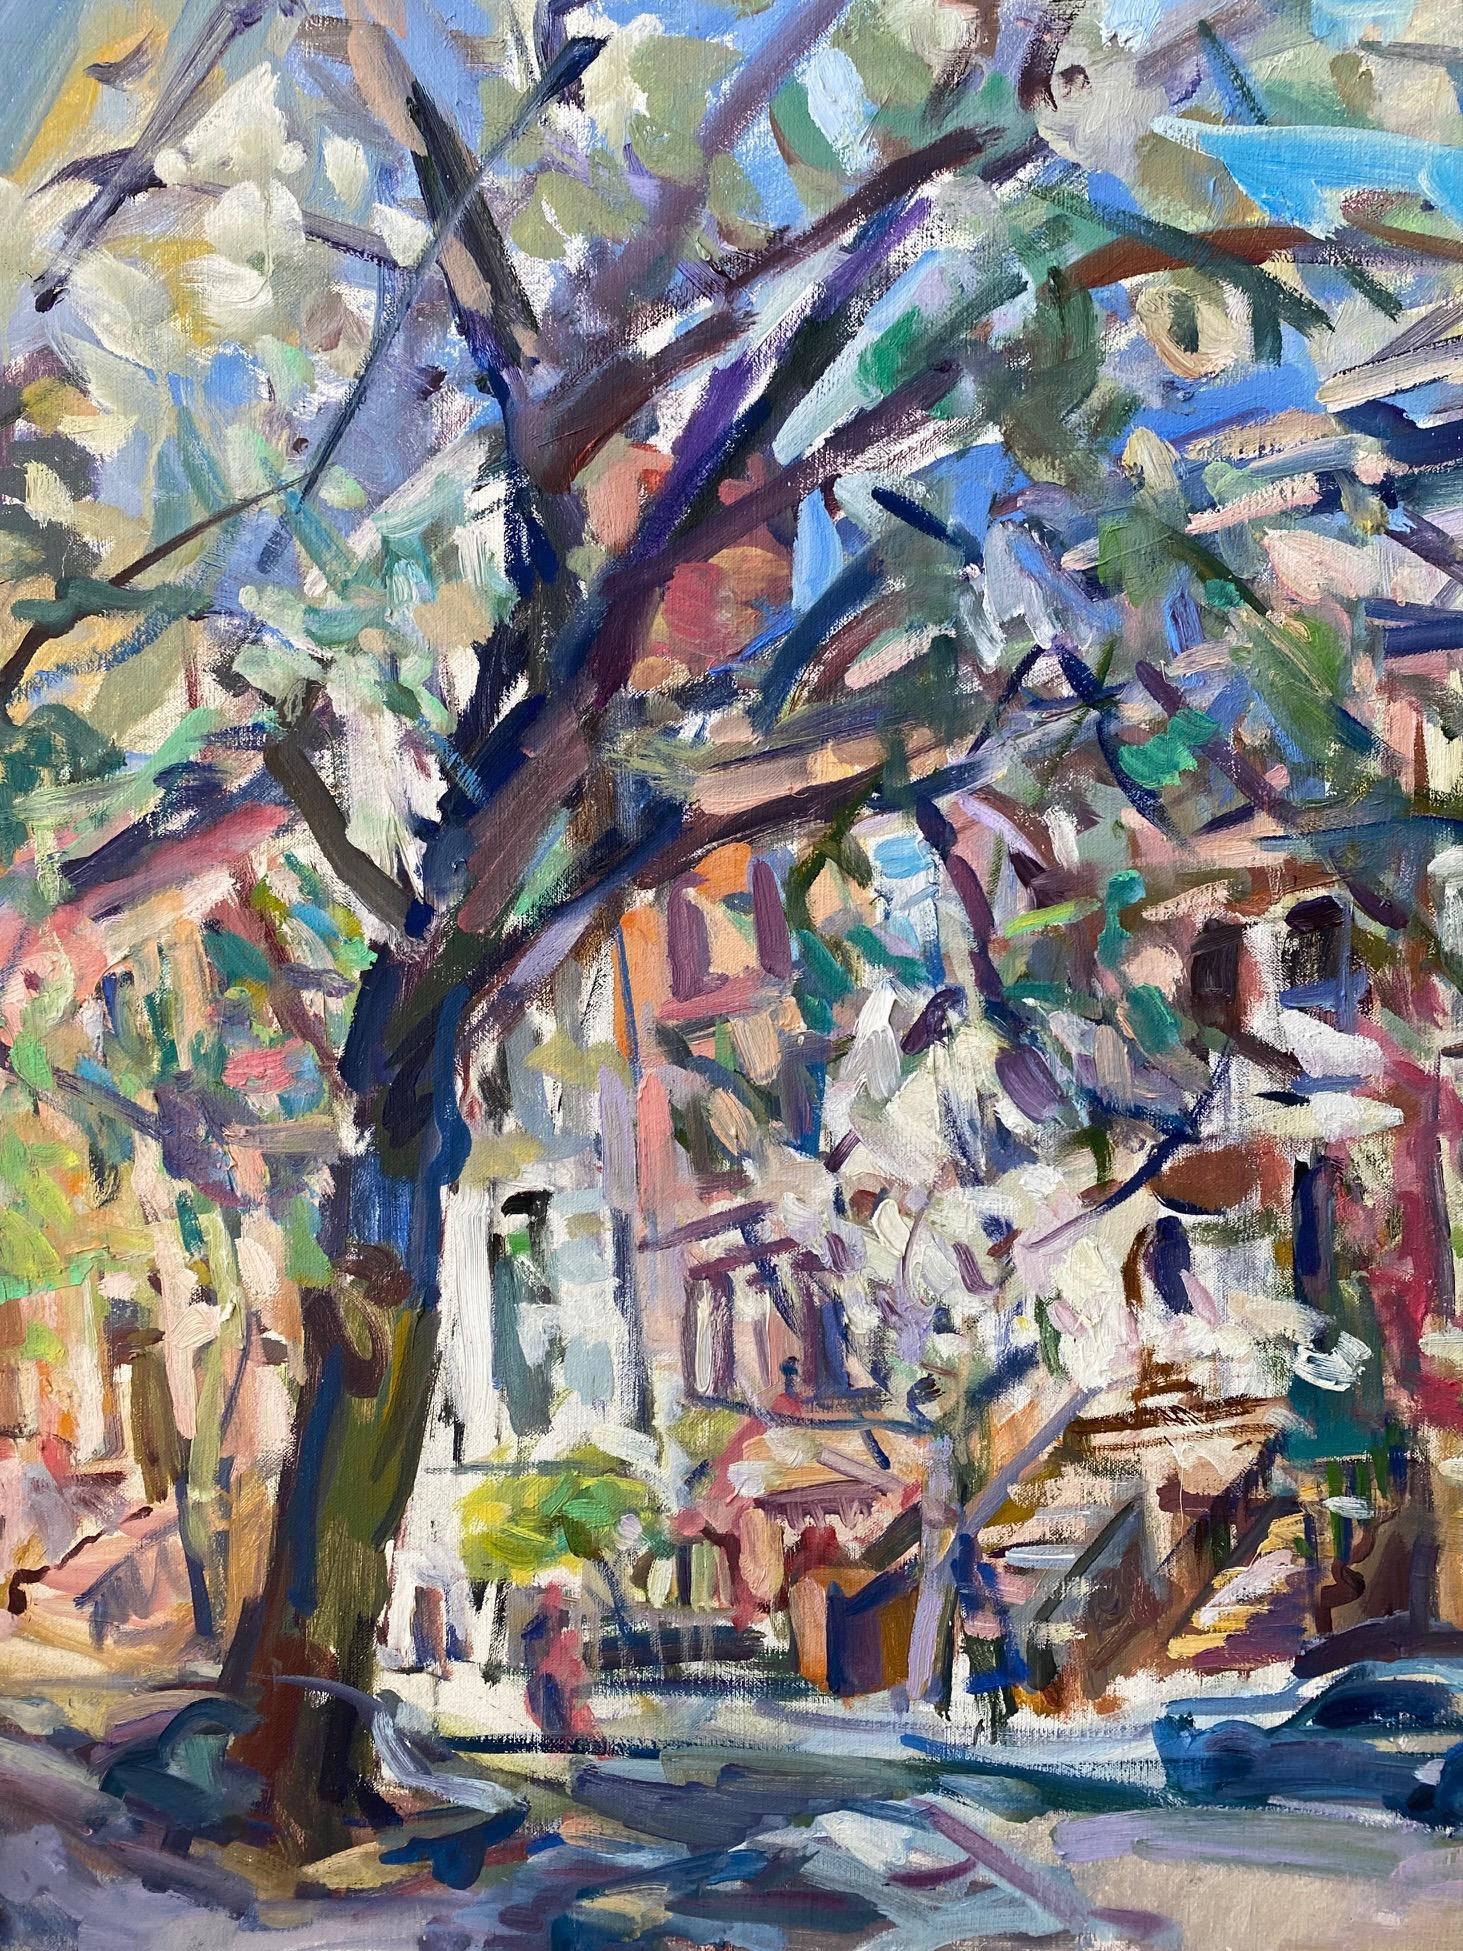 With her love for the abstract expressionist style of art, fine art artist Sonia Grineva created this sensational, multi-dimensional interpretation of the  bustling, colorful, Manhattan Carnegie Hill neighborhood in New York City with her use of